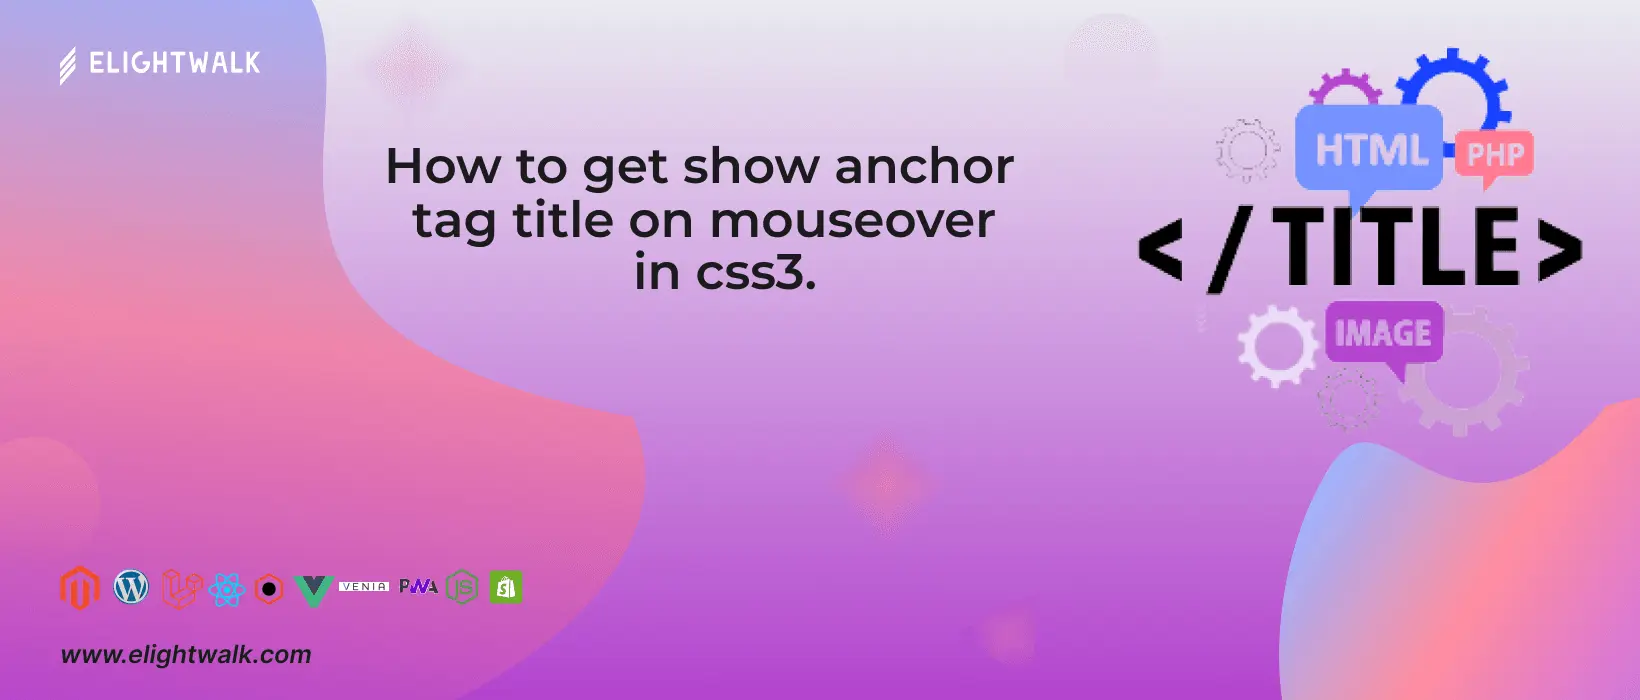 How to get the show anchor tag title on mouseover in css3.